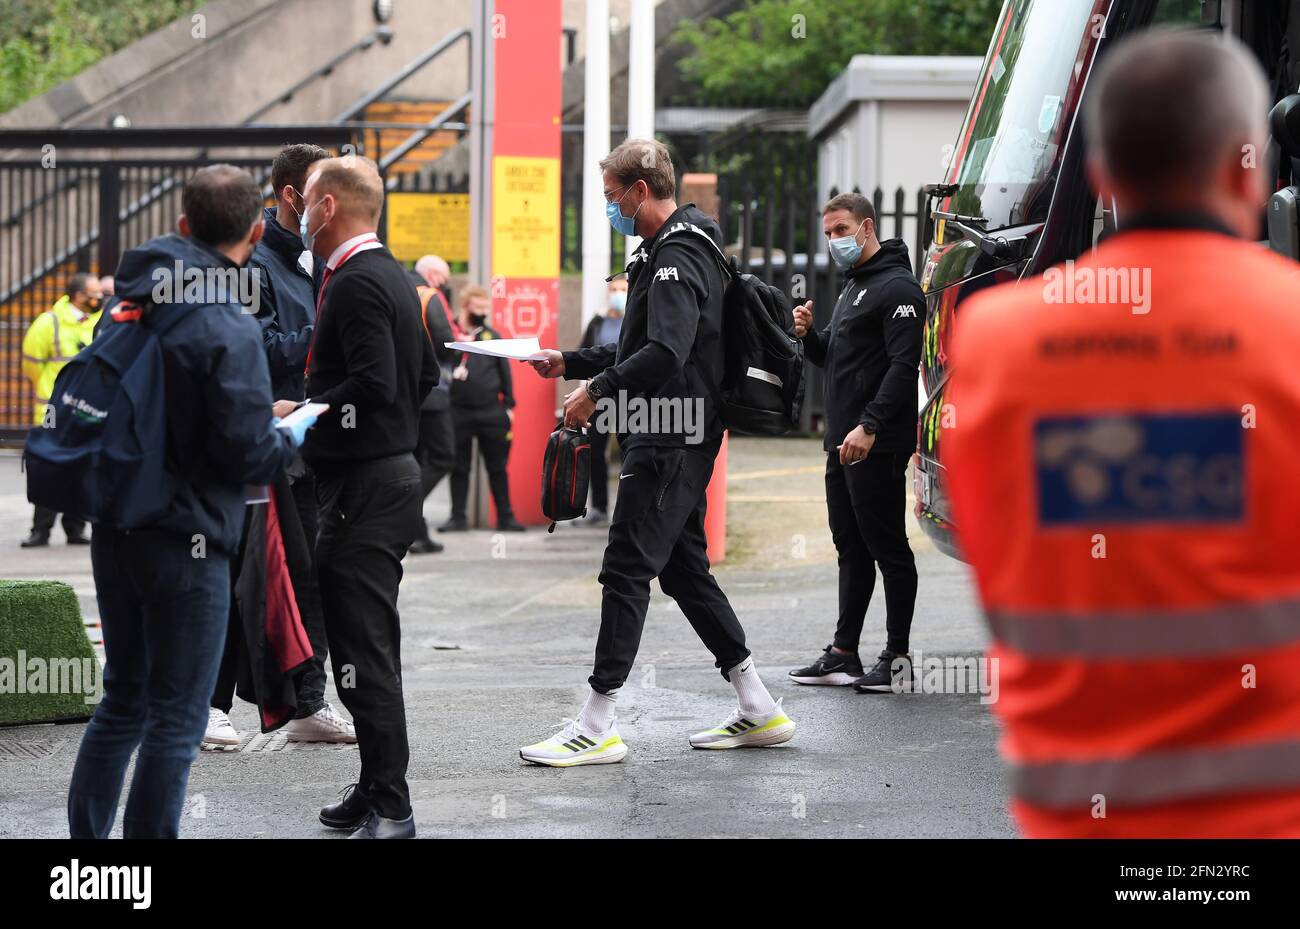 Liverpool manager Jurgen Klopp disembarks the team bus after arriving at the ground before the Premier League match at Old Trafford, Manchester. Picture date: Thursday May 13, 2021. Stock Photo